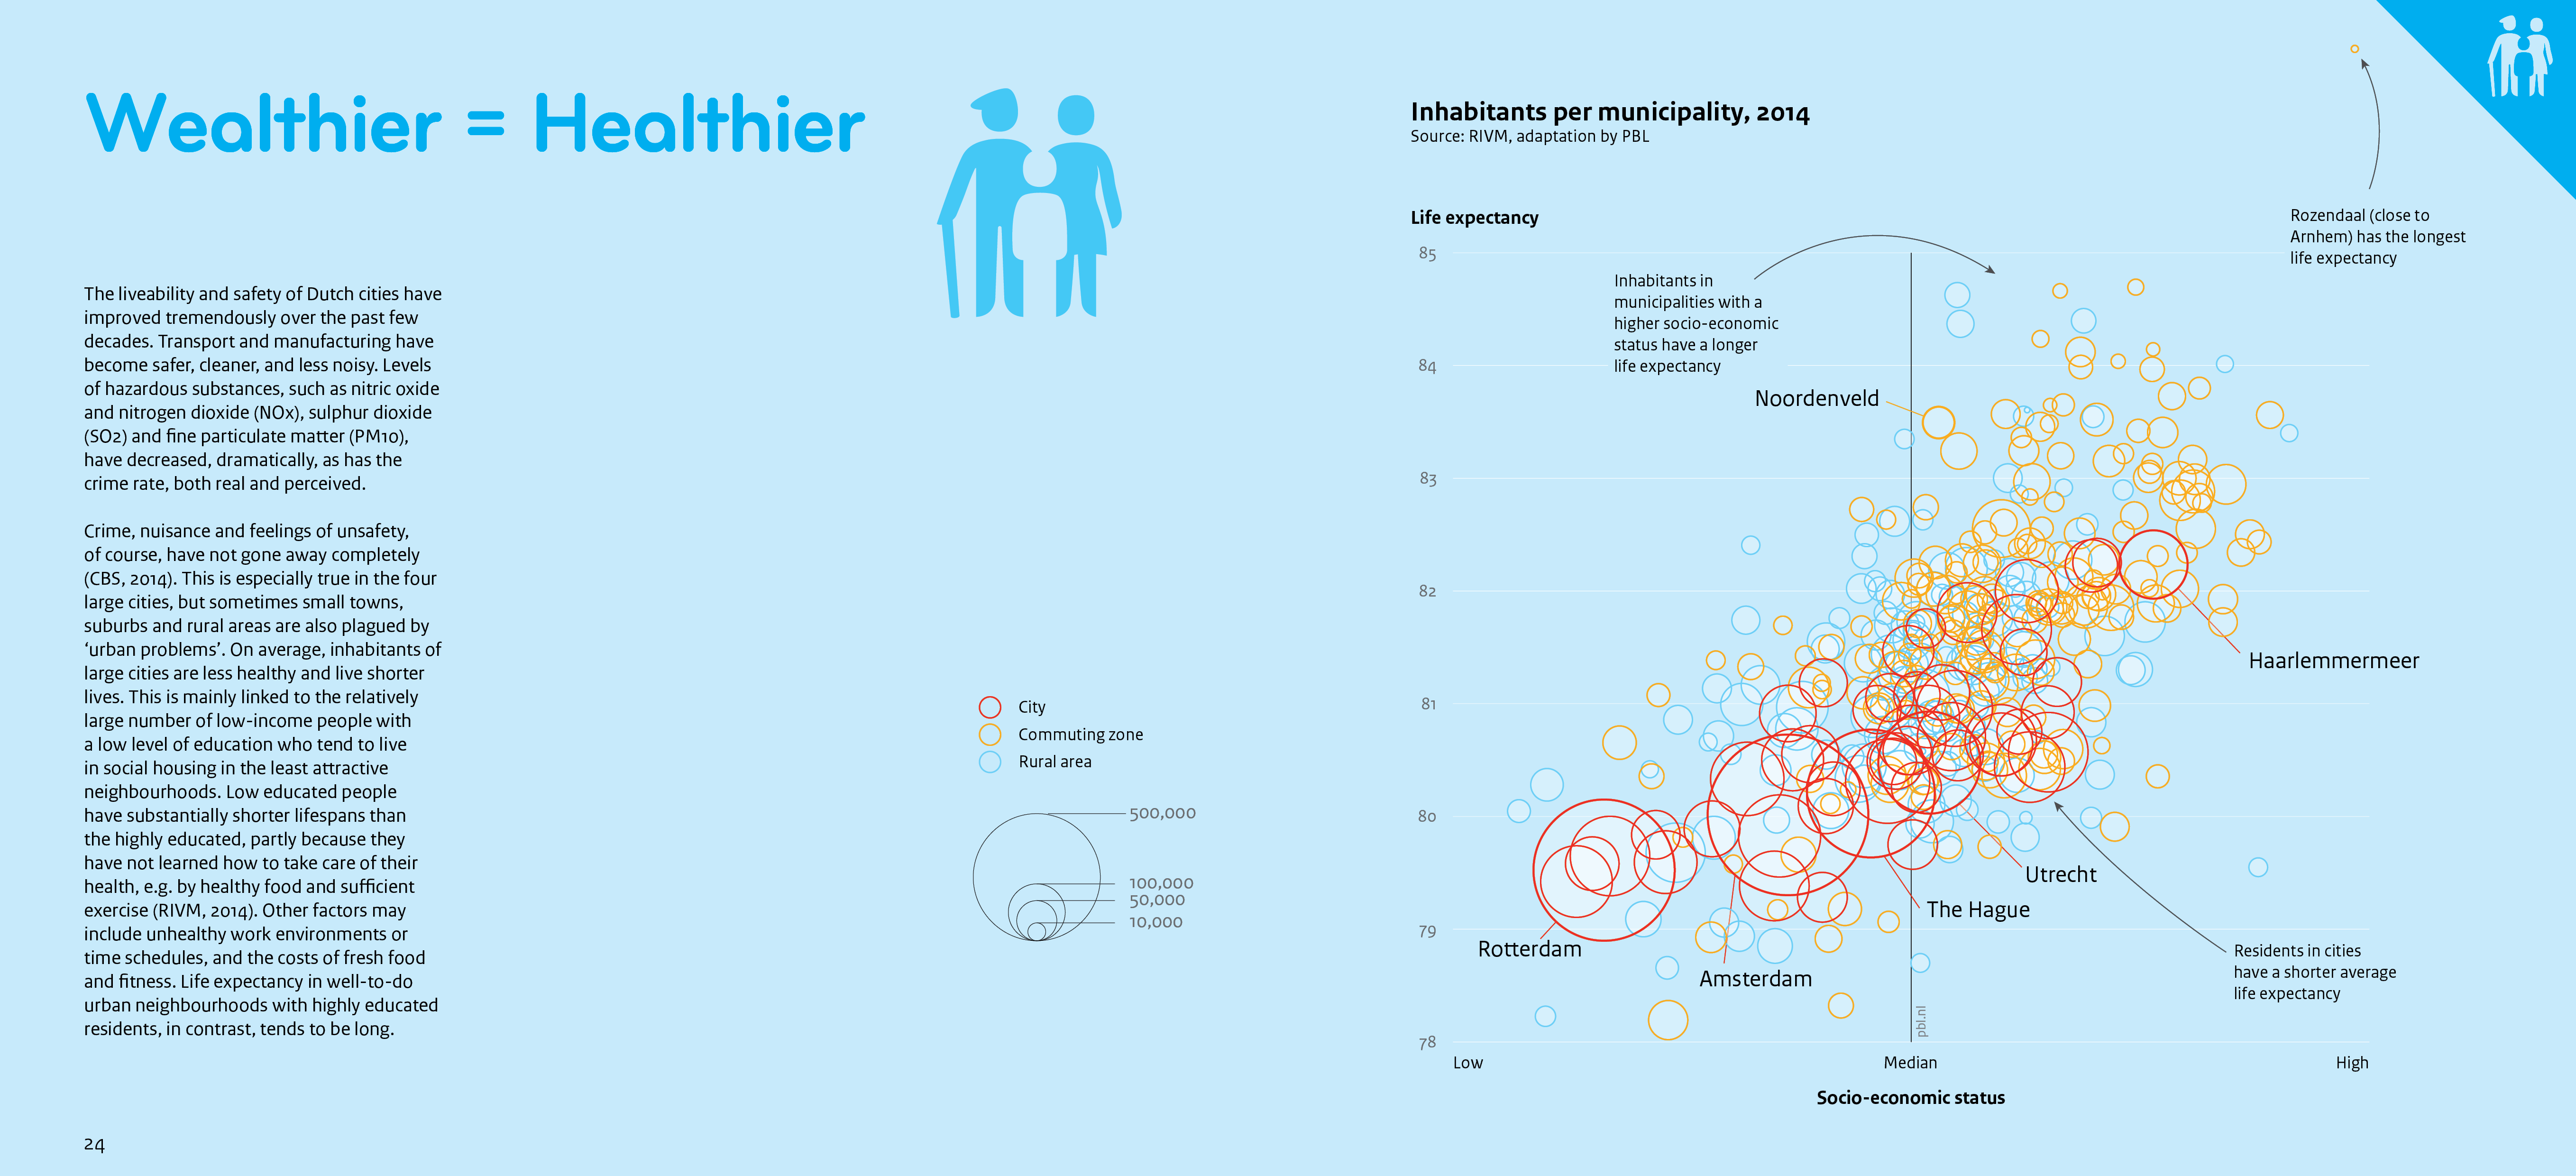 This infographic shows the life expectancy and the socio-economic status per municipality.